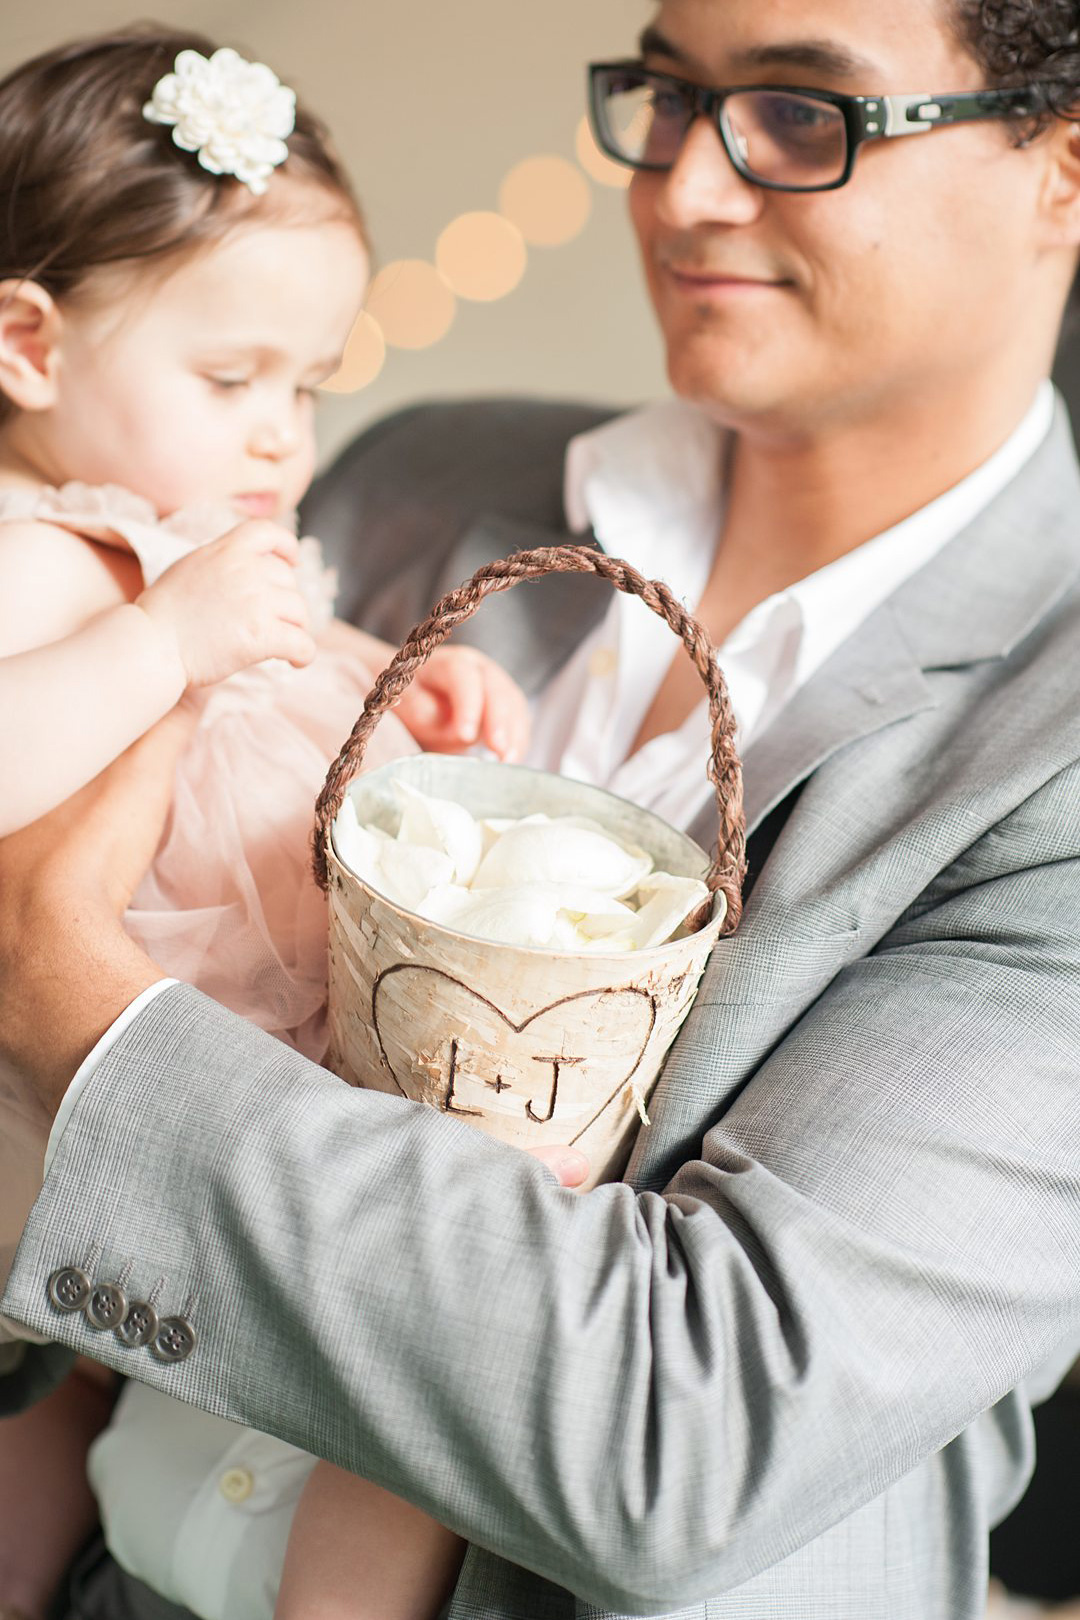 The flower girl petal bucket matched the bride and groom's woodsy cake for a wedding at sleepaway summer camp, Club Getaway. Photographed by Mikkel Paige Photography.